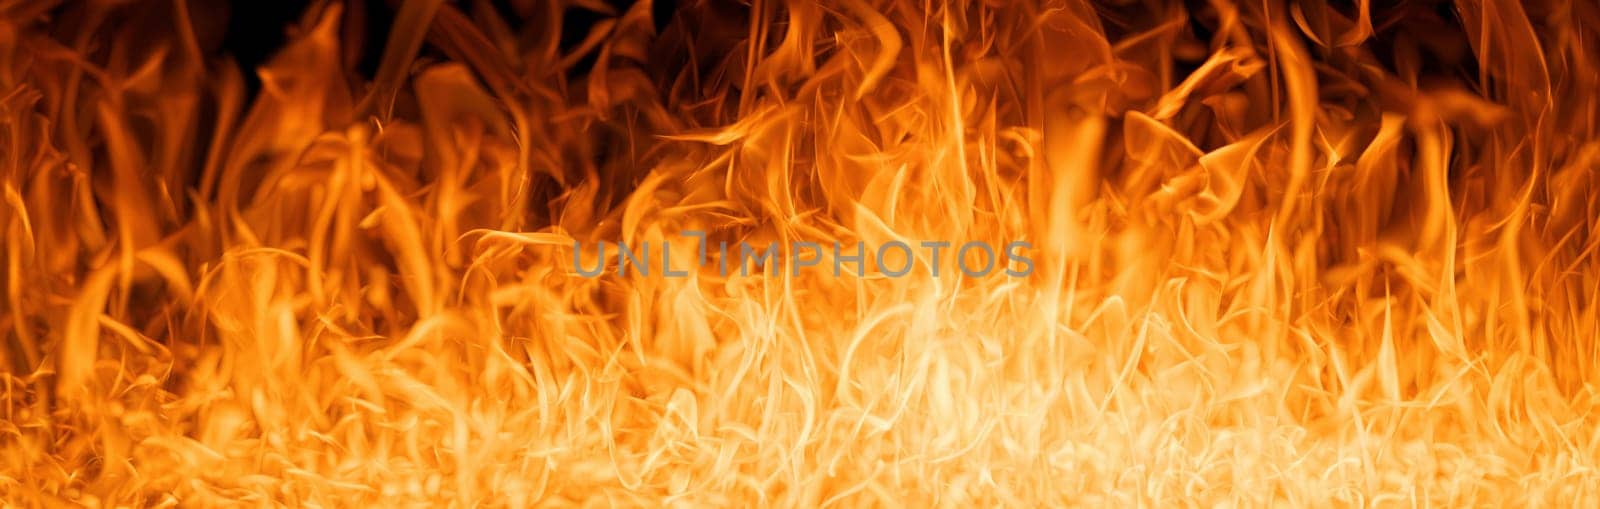 Hell flames, devil's mouth. fire banner. A background of scalding flames. Firestorm. Fire burning. Bright burning flames on a black background. Wall of Real fire, abstract background. Fire flames.